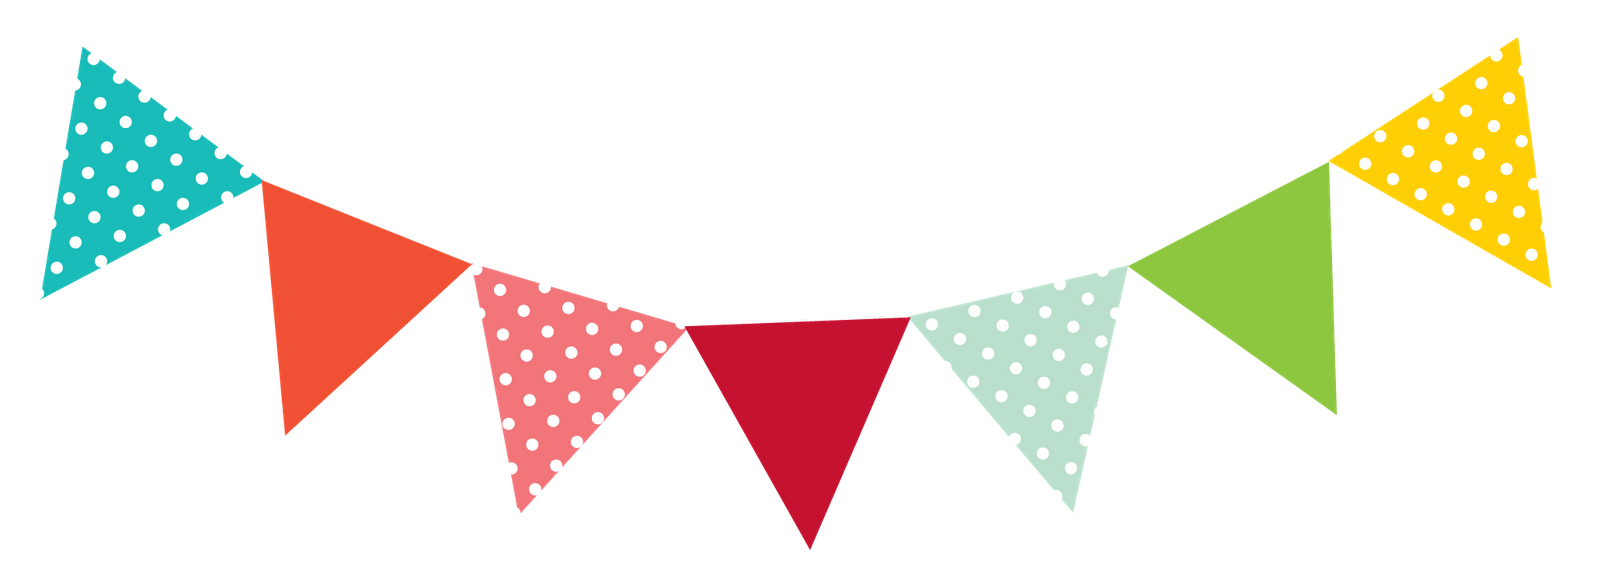 Free Pennant Flags Png, Download Free Pennant Flags Png png images ...